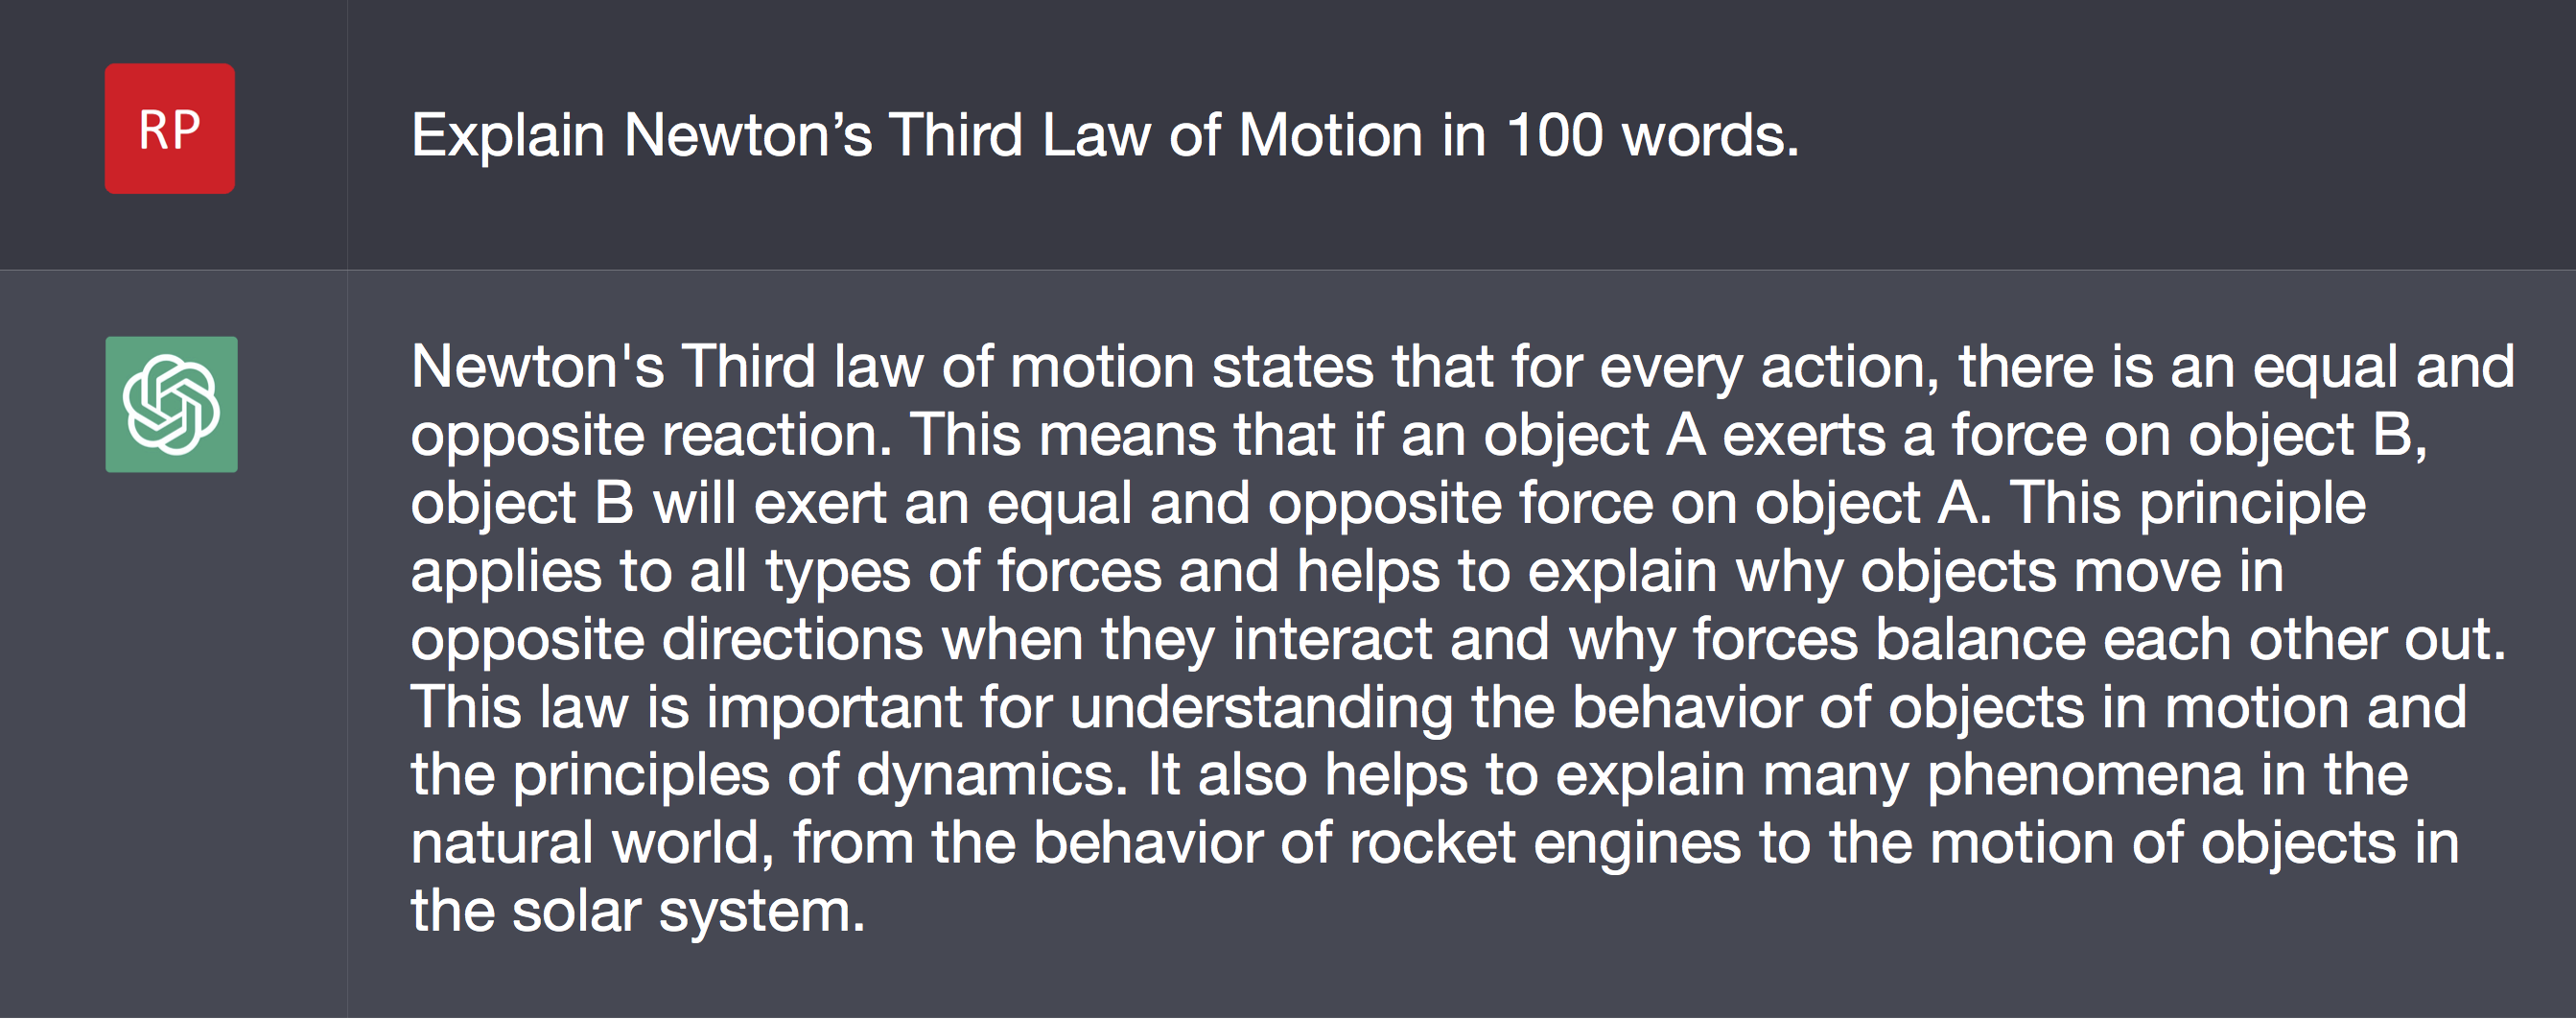 188-5 ChatGPT 3rd law 100 words